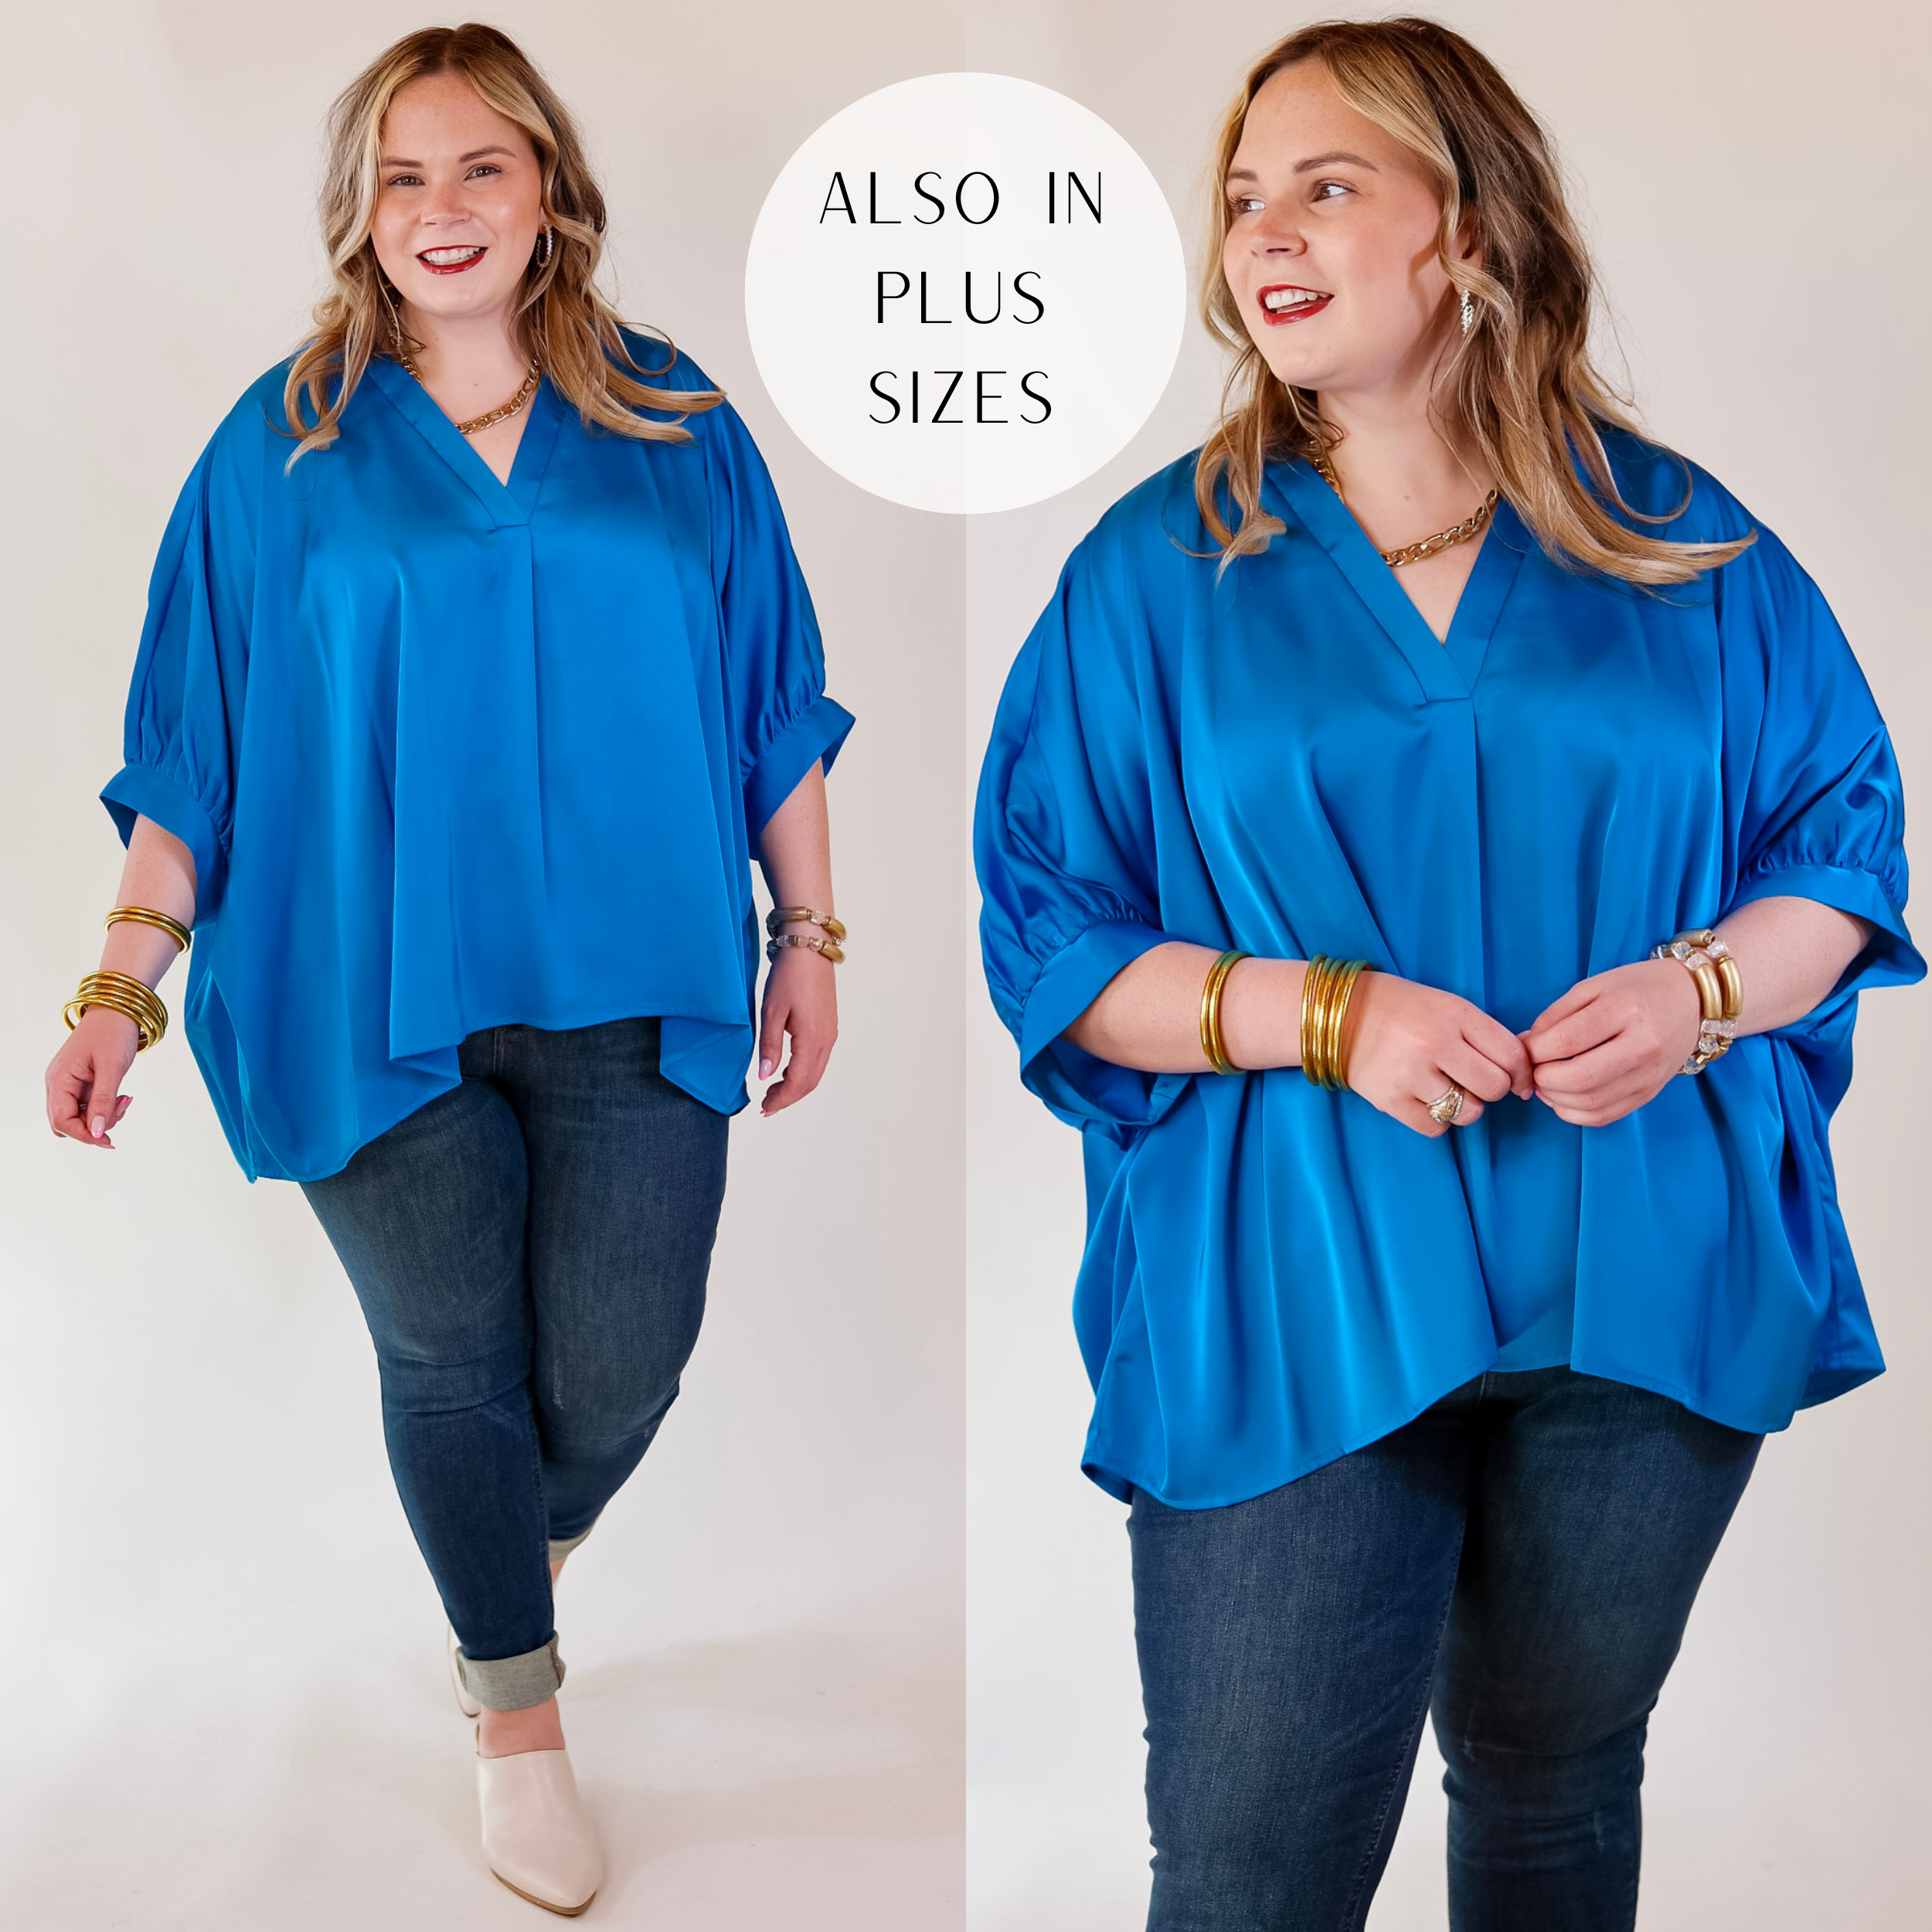 Model is wearing a flowy blue blouse featuring a v neckline, half sleeves, and cuffed sleeves